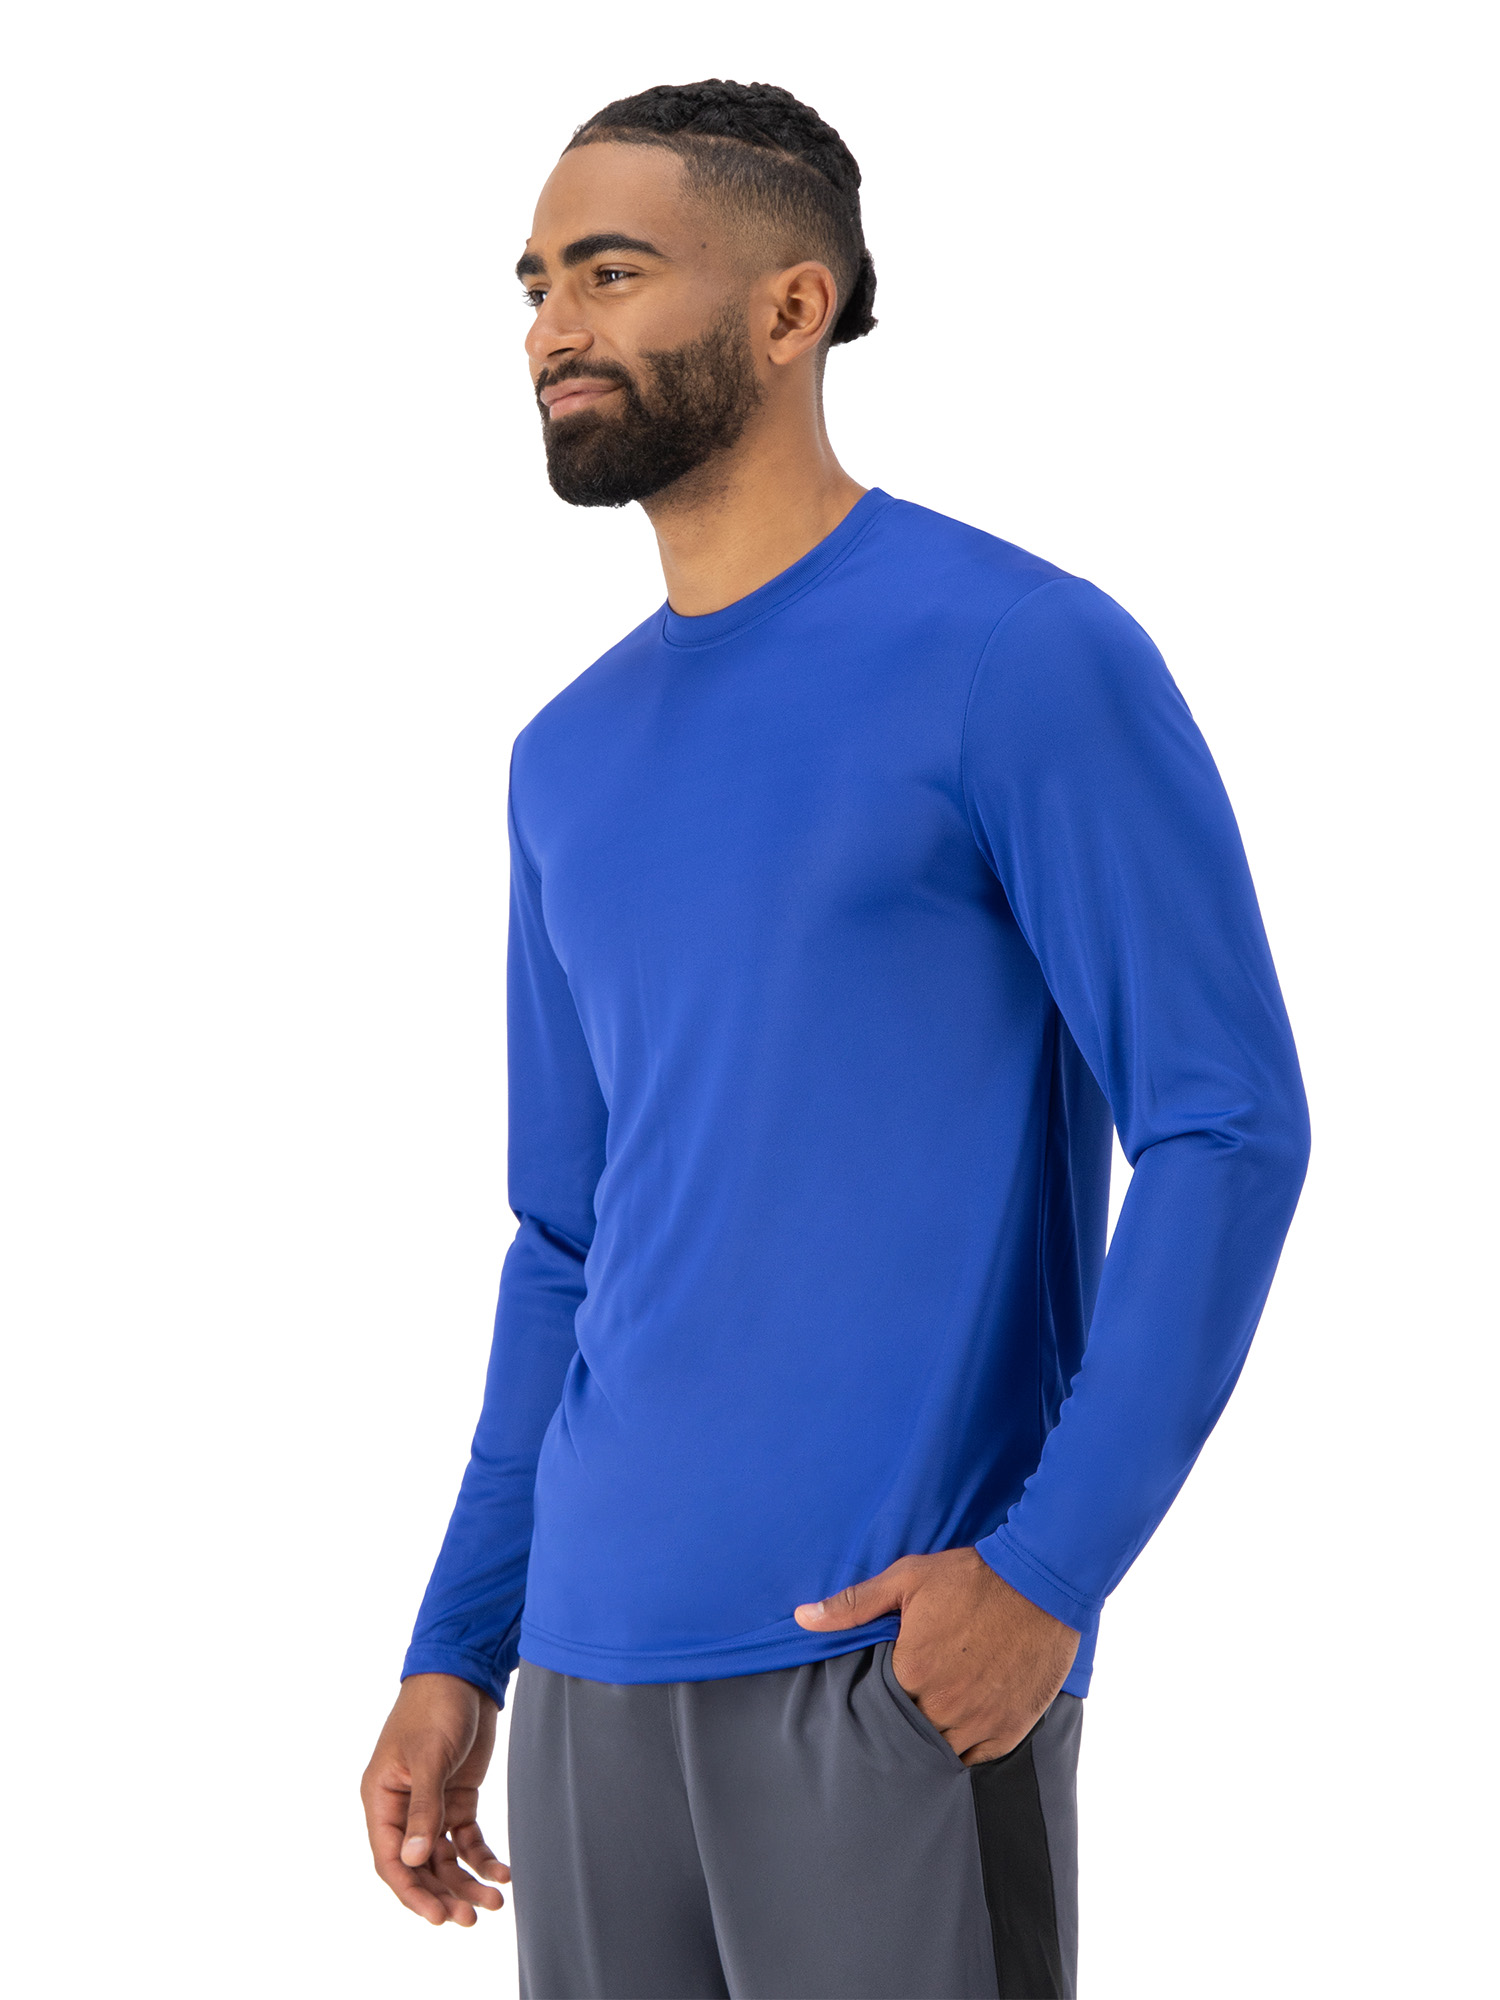 Hanes Men's and Big Men's Cool Dri Performance Long Sleeve T-Shirt (40+ UPF), Up to Size 3XL - image 4 of 8